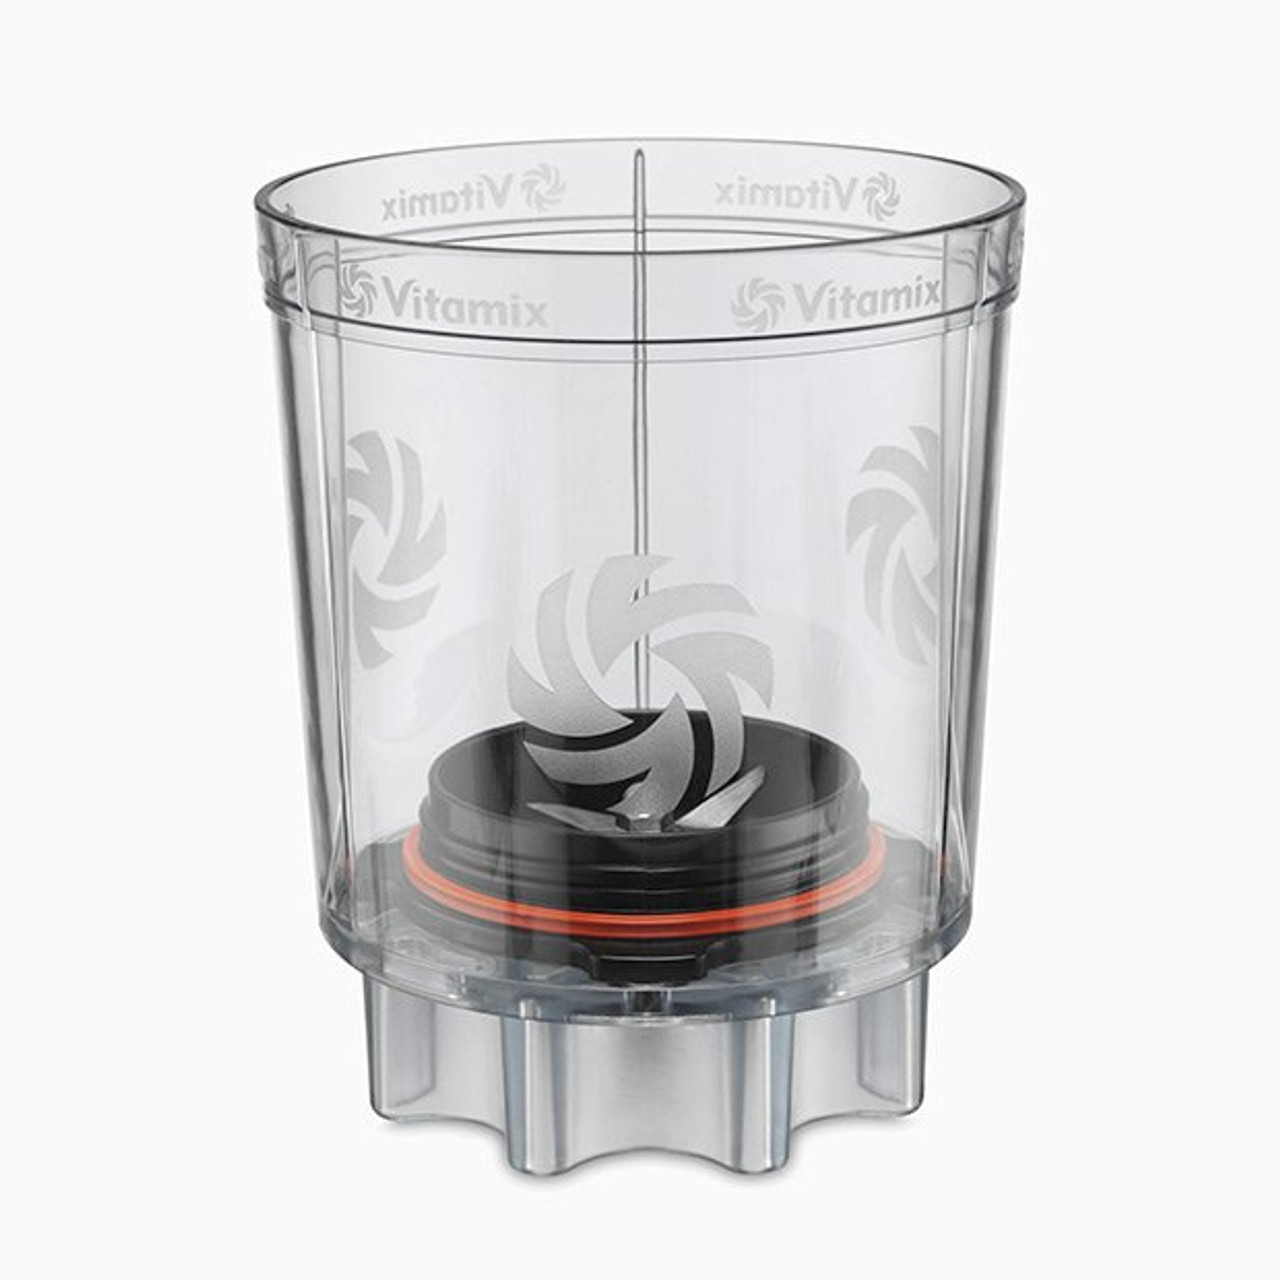 https://cdn11.bigcommerce.com/s-hccytny0od/images/stencil/1280x1280/products/1604/5641/vitamix-personal-cup-adapter-2__22896.1532036761.jpg?c=2?imbypass=on